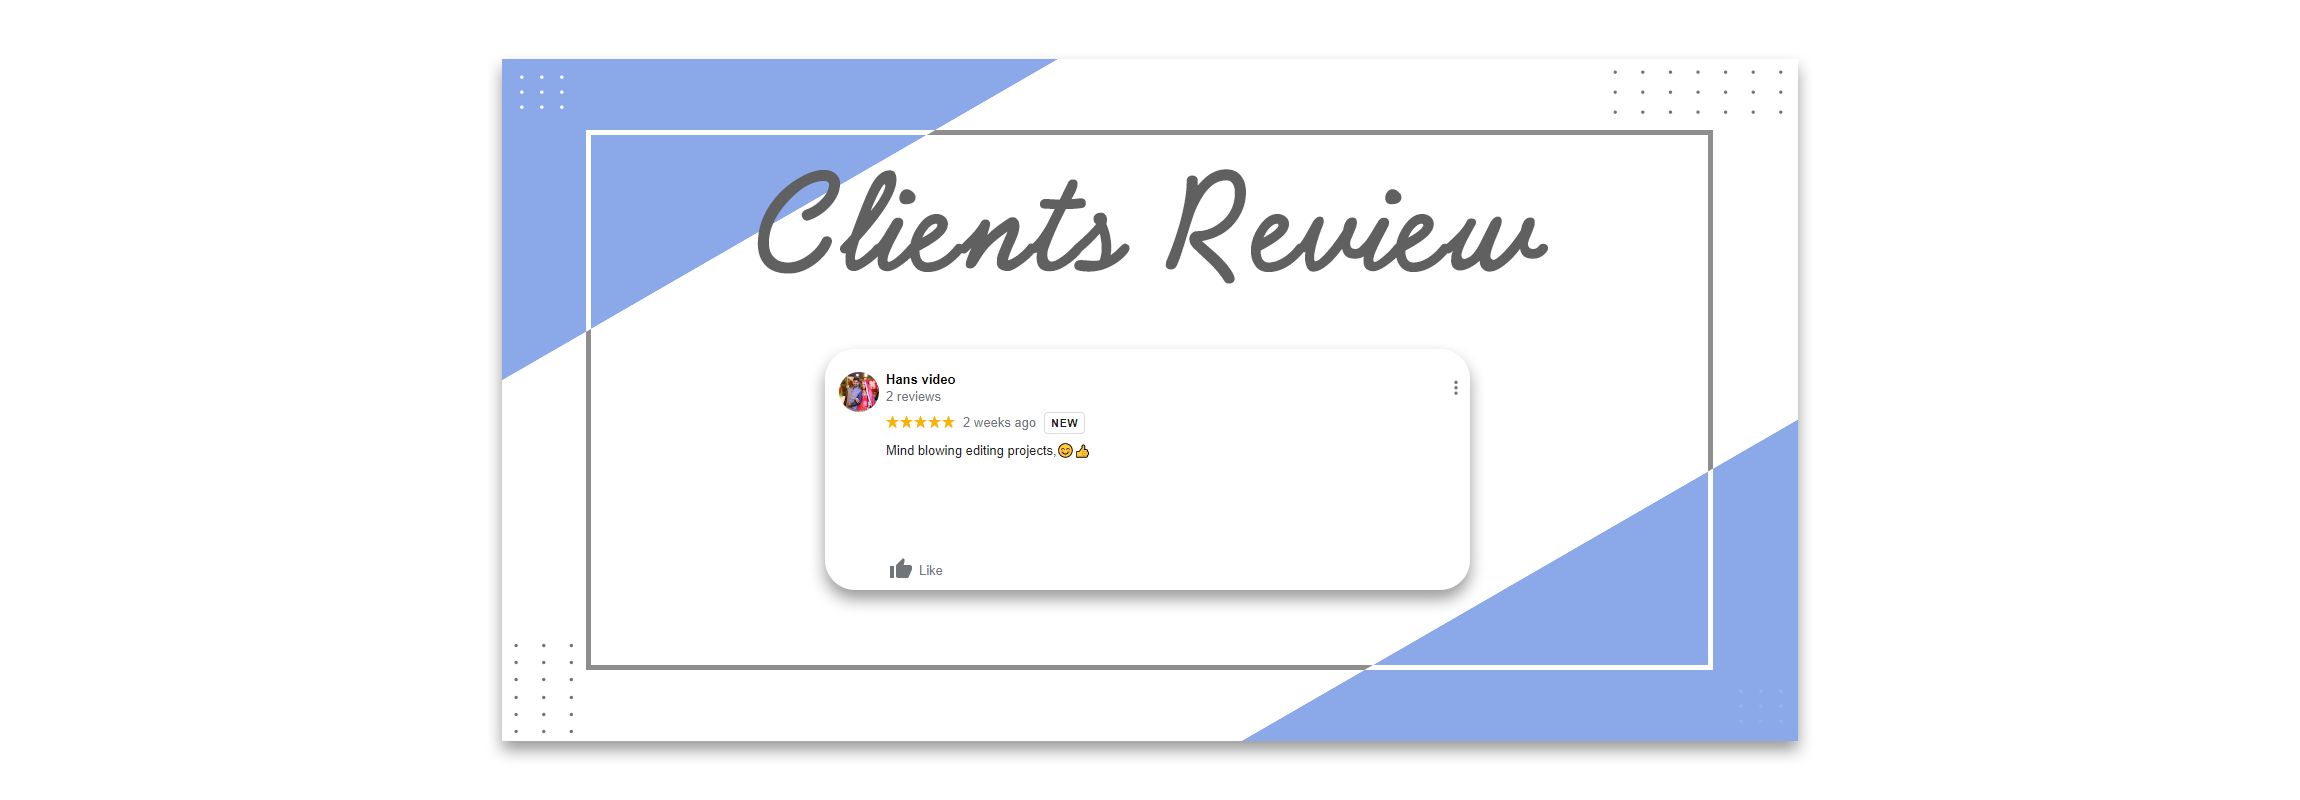 google client review img edit zone india 24